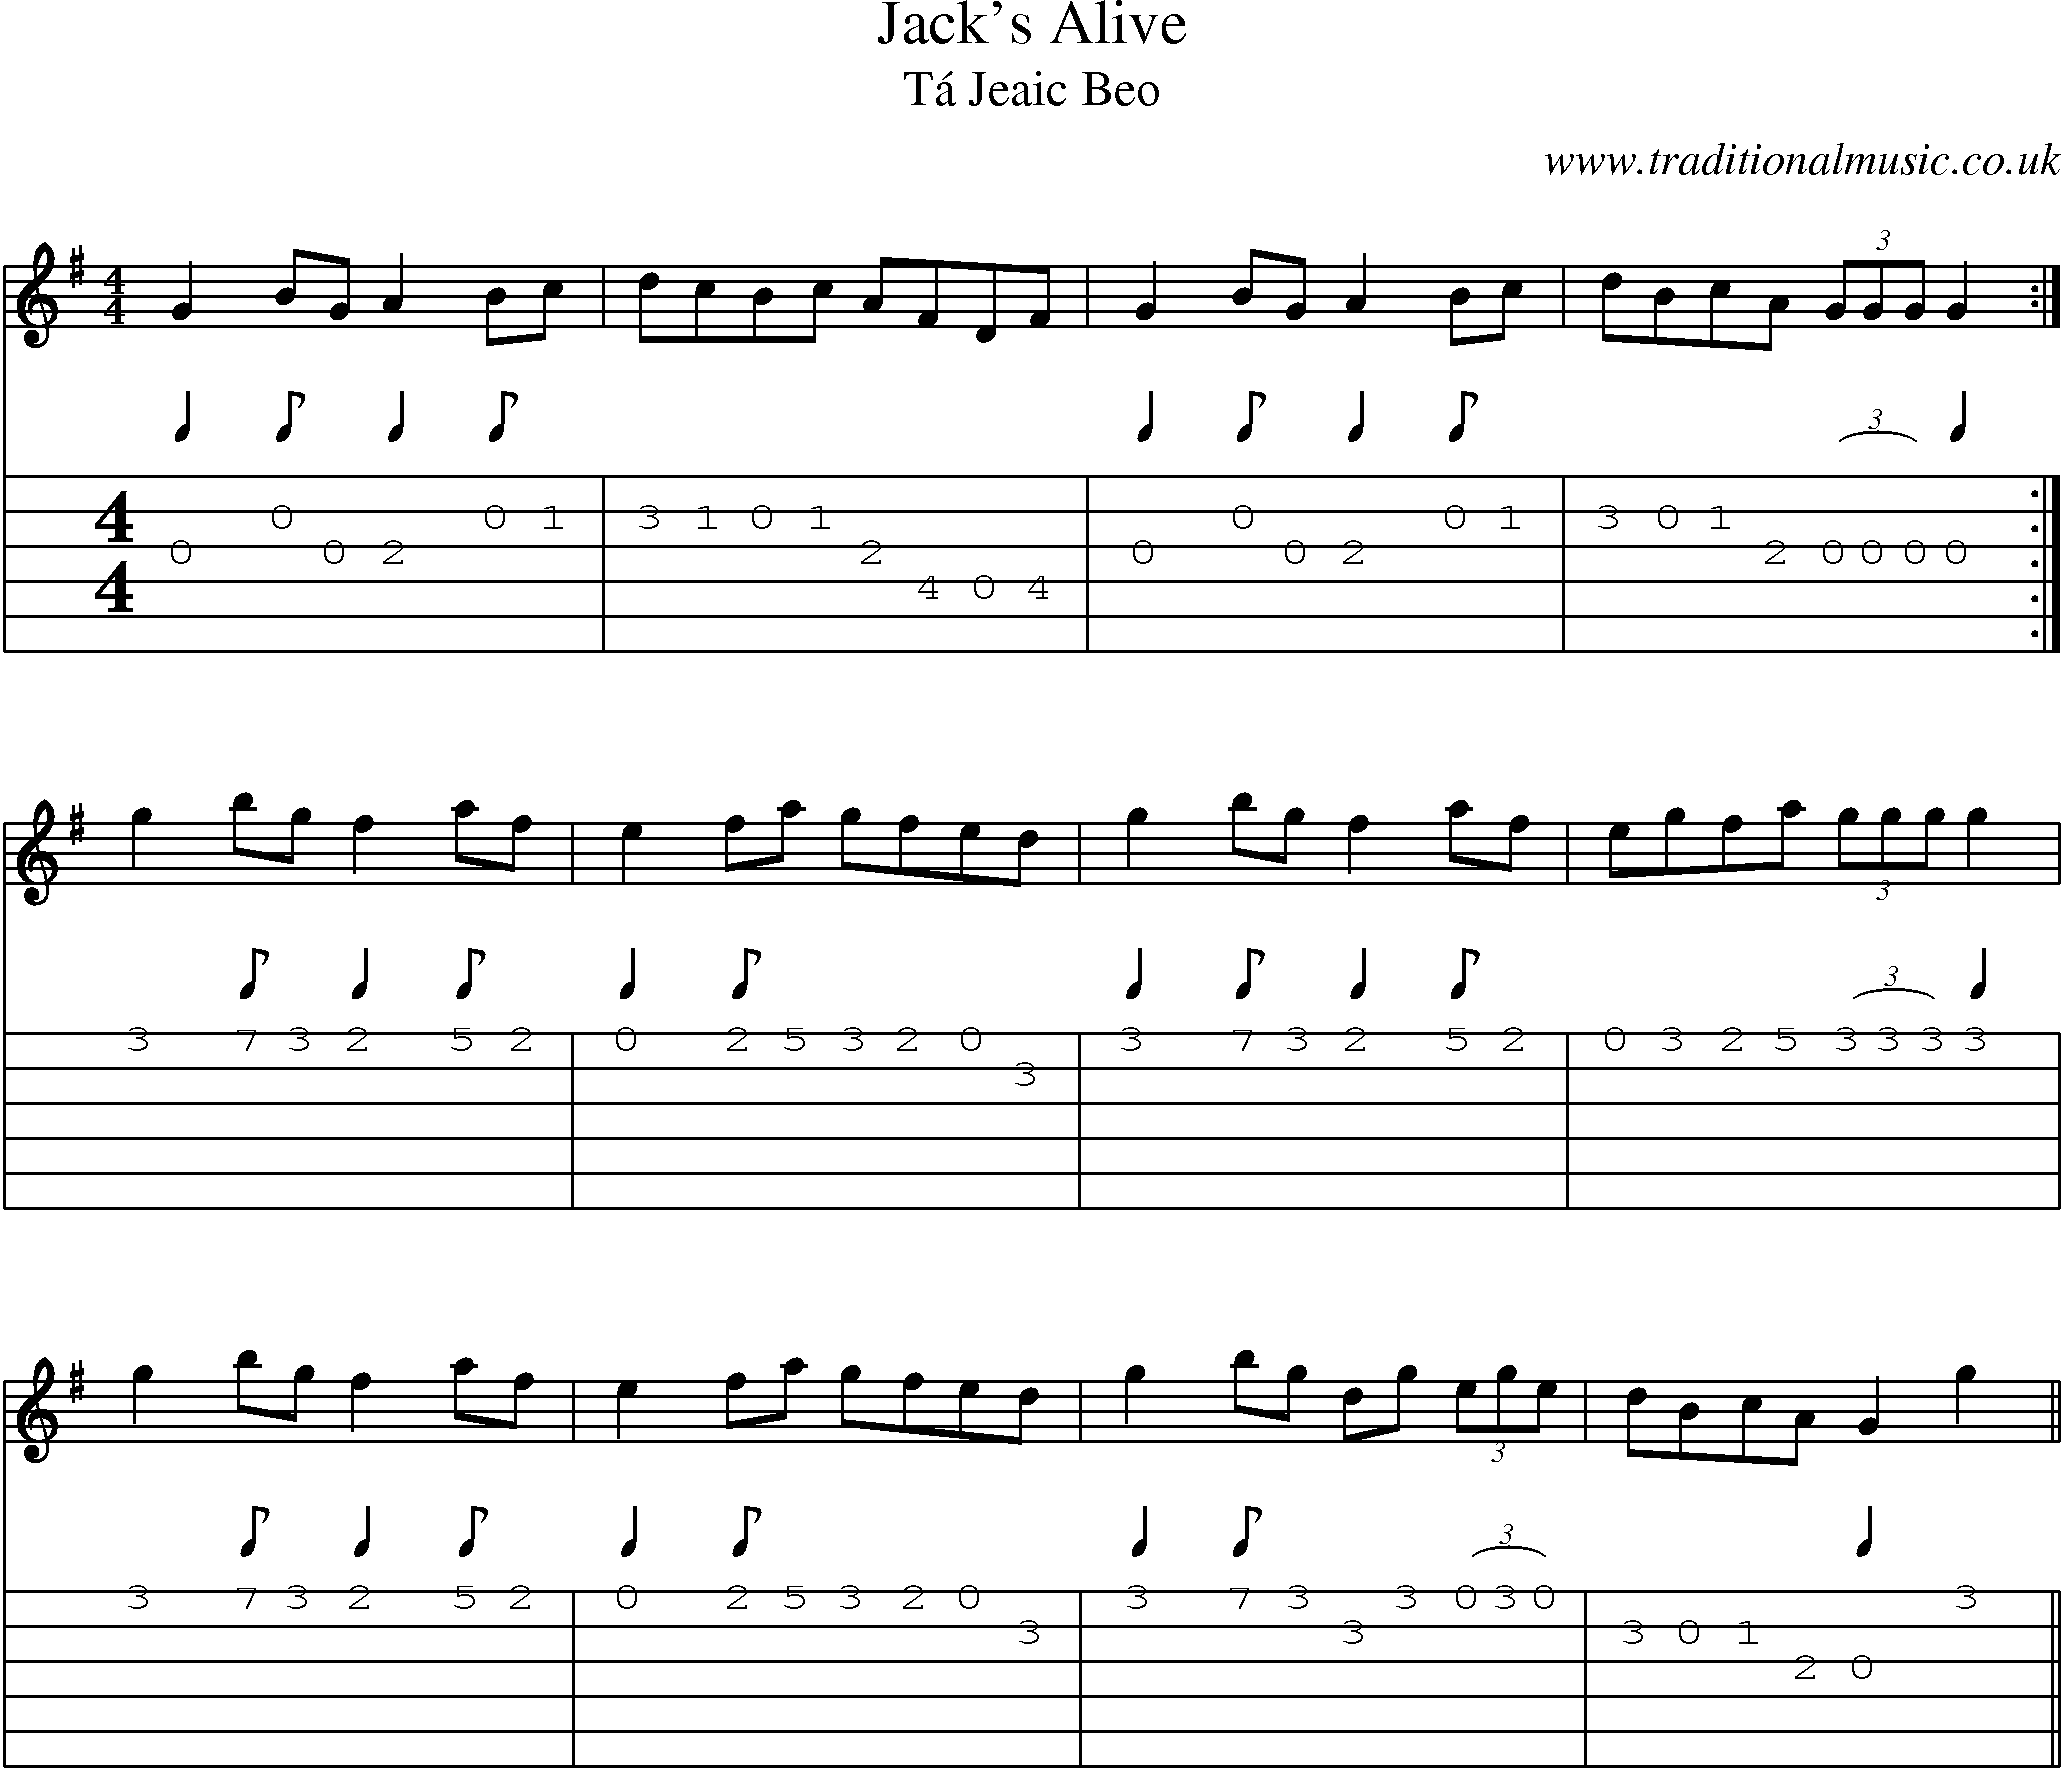 Music Score and Guitar Tabs for Jacks Alive